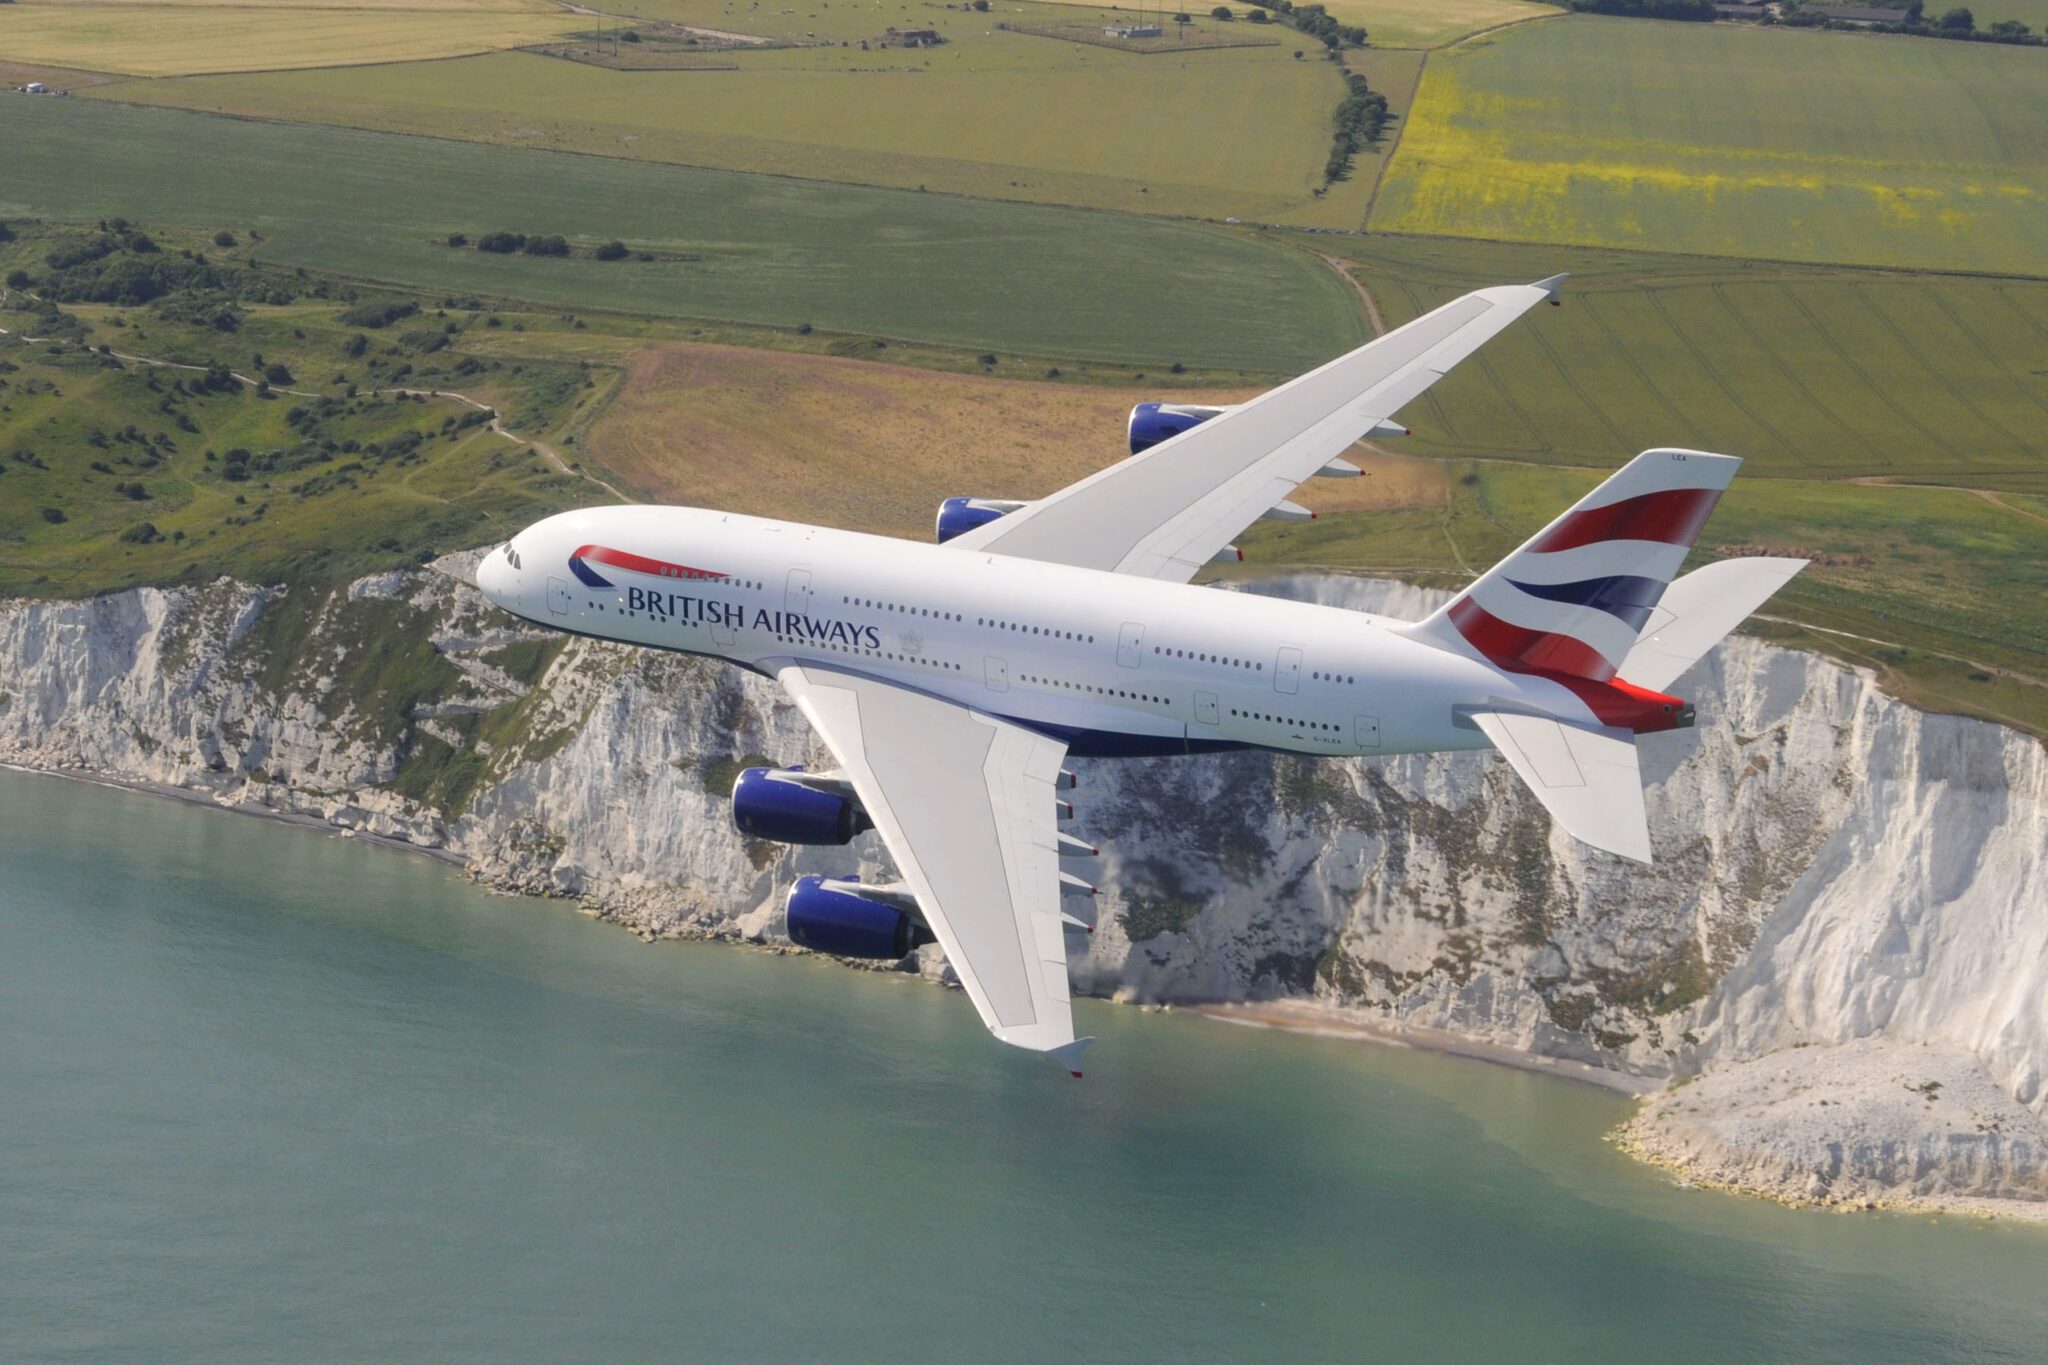 New Lounges, Seats, and AI Tech for British Airways: 5 Big Changes Coming Soon